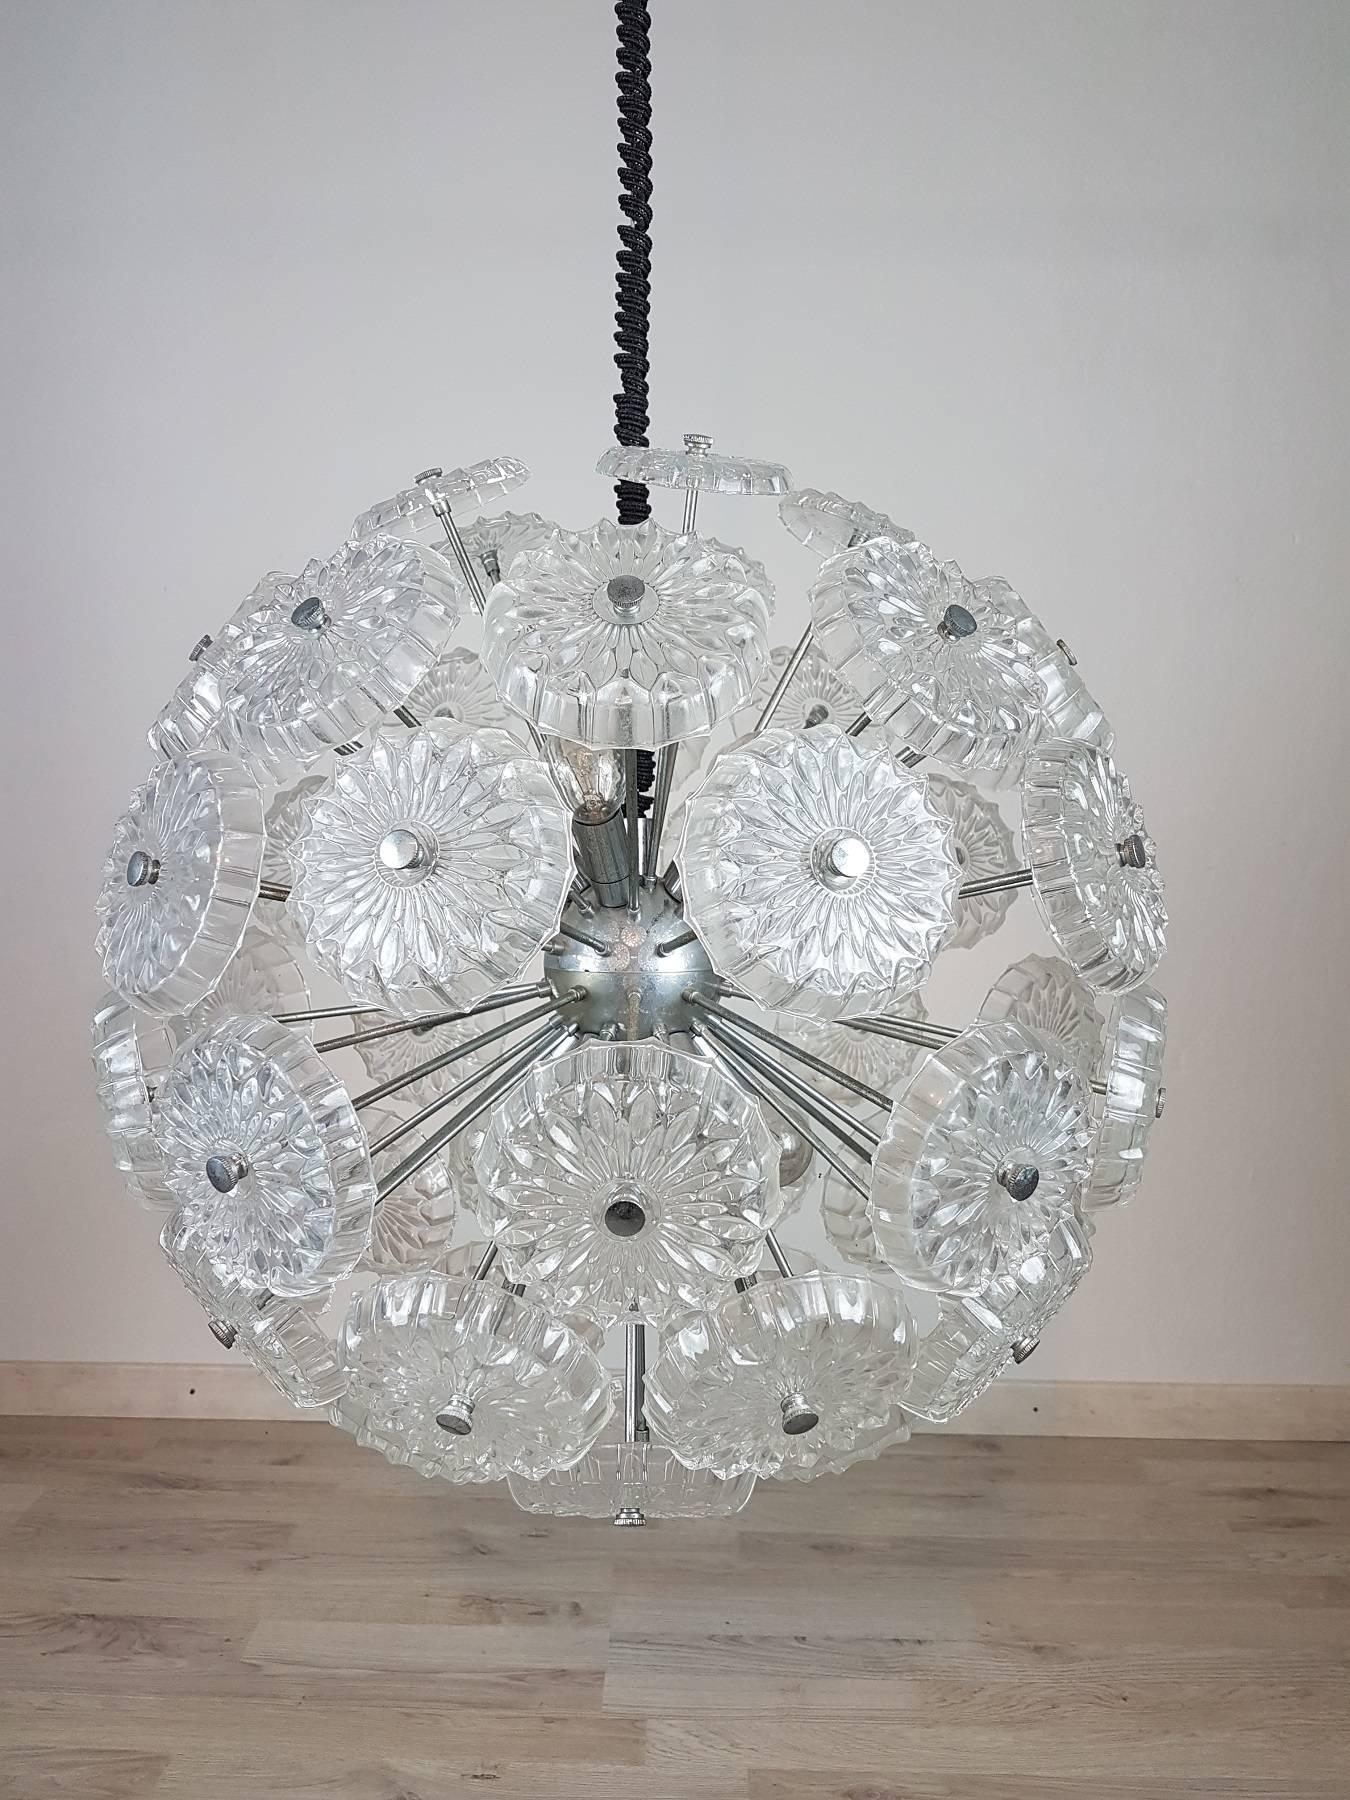 Beautiful and refined Italian chandelier from the circa 1980s in flower glass, chromed interior. Very bright ten interior lights. Used conditions. The height can be adjusted as desired.